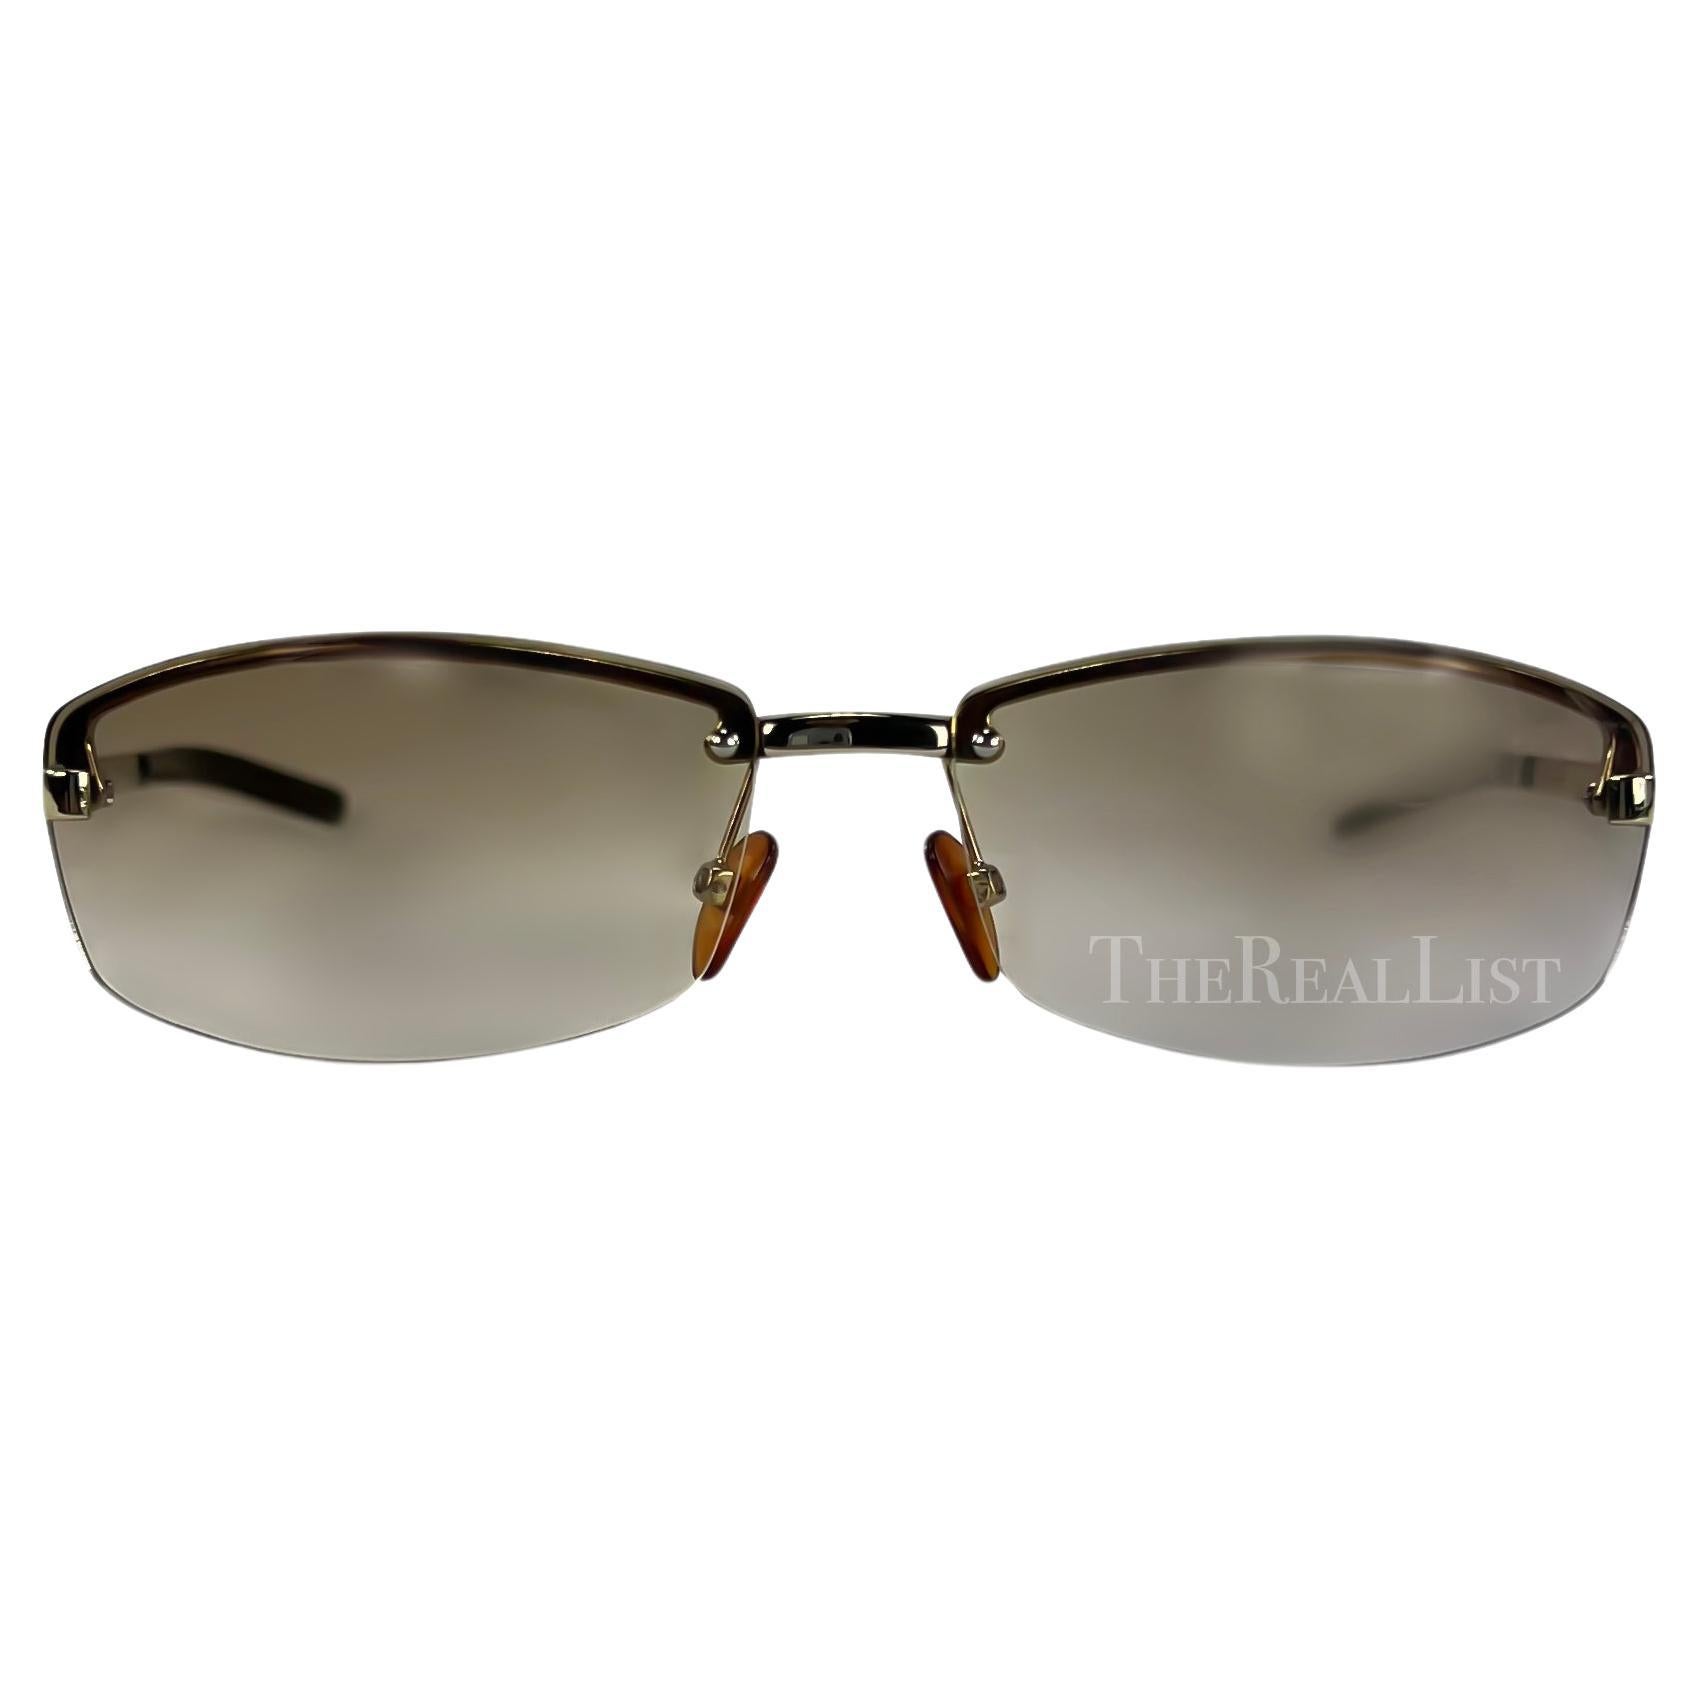 Presenting a pair of brown rimless Gucci sunglasses, designed by Tom Ford. From the early 2000s, these sunglasses feature a lightly tinted lens and thin silver-tone arms, accented with a square 'G'. 

Approximate Measurements:  
Frame Height: